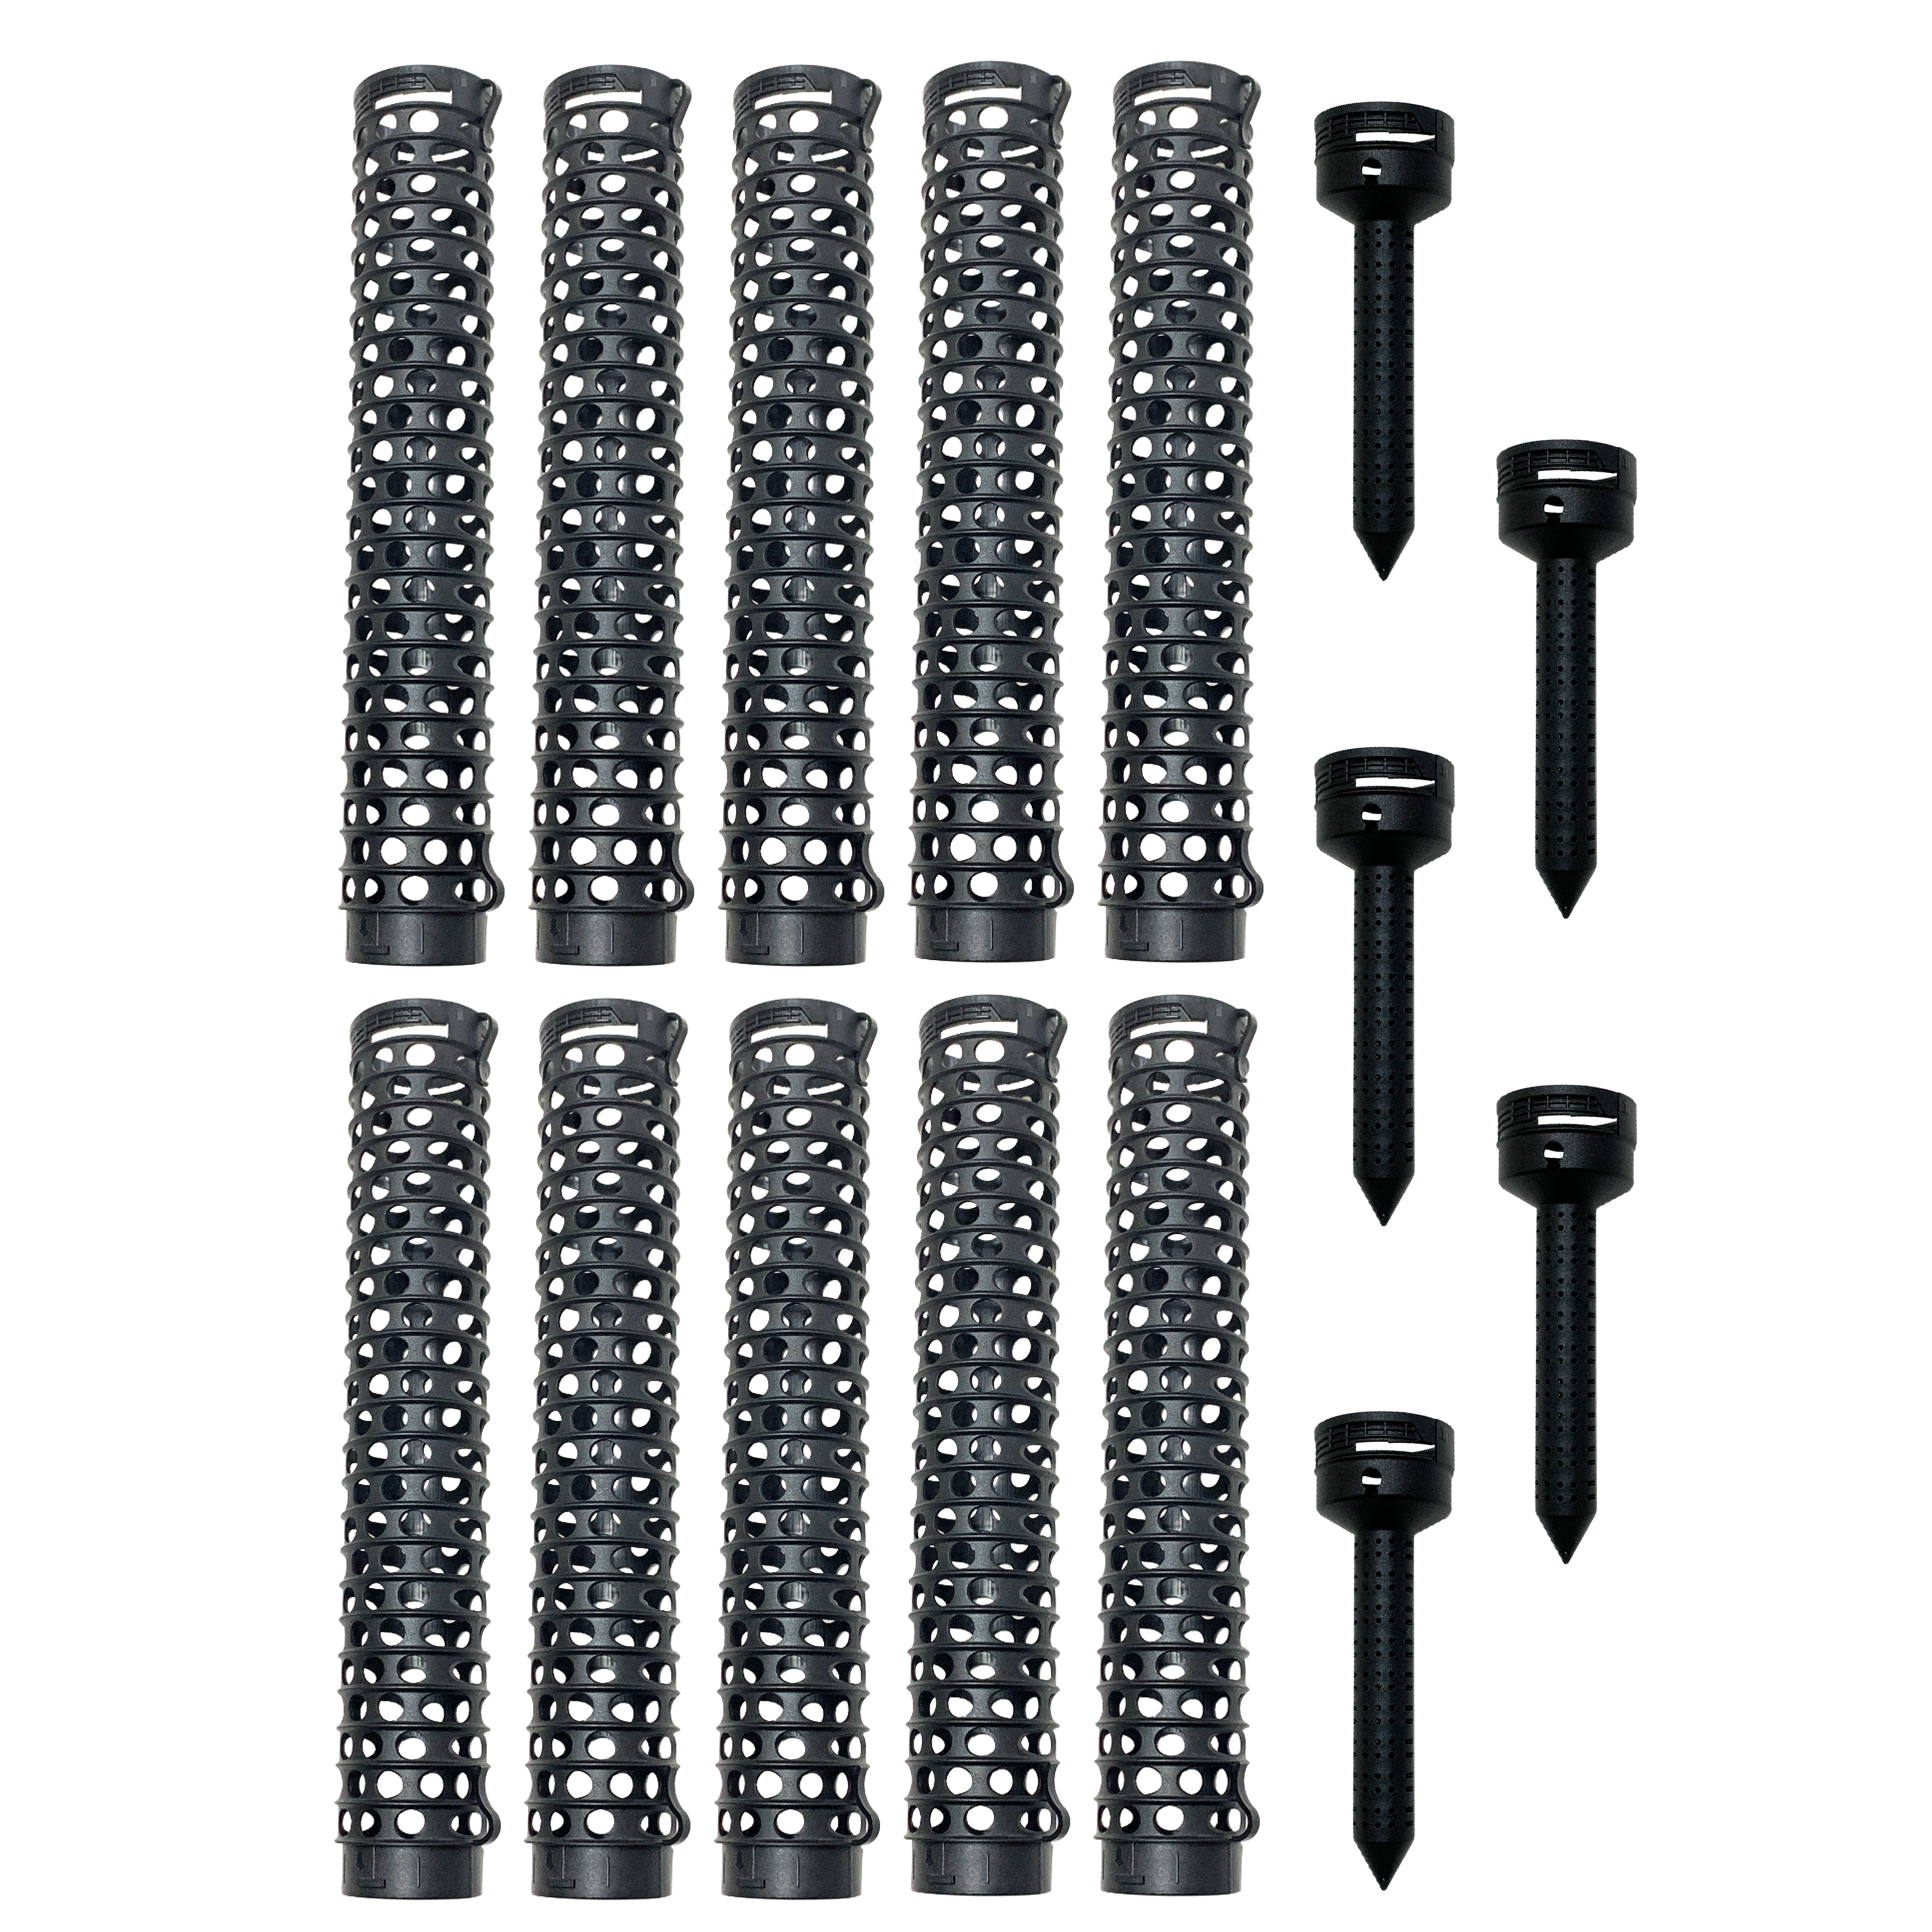 Moss Pole – 10 Pack with 5 Spikes